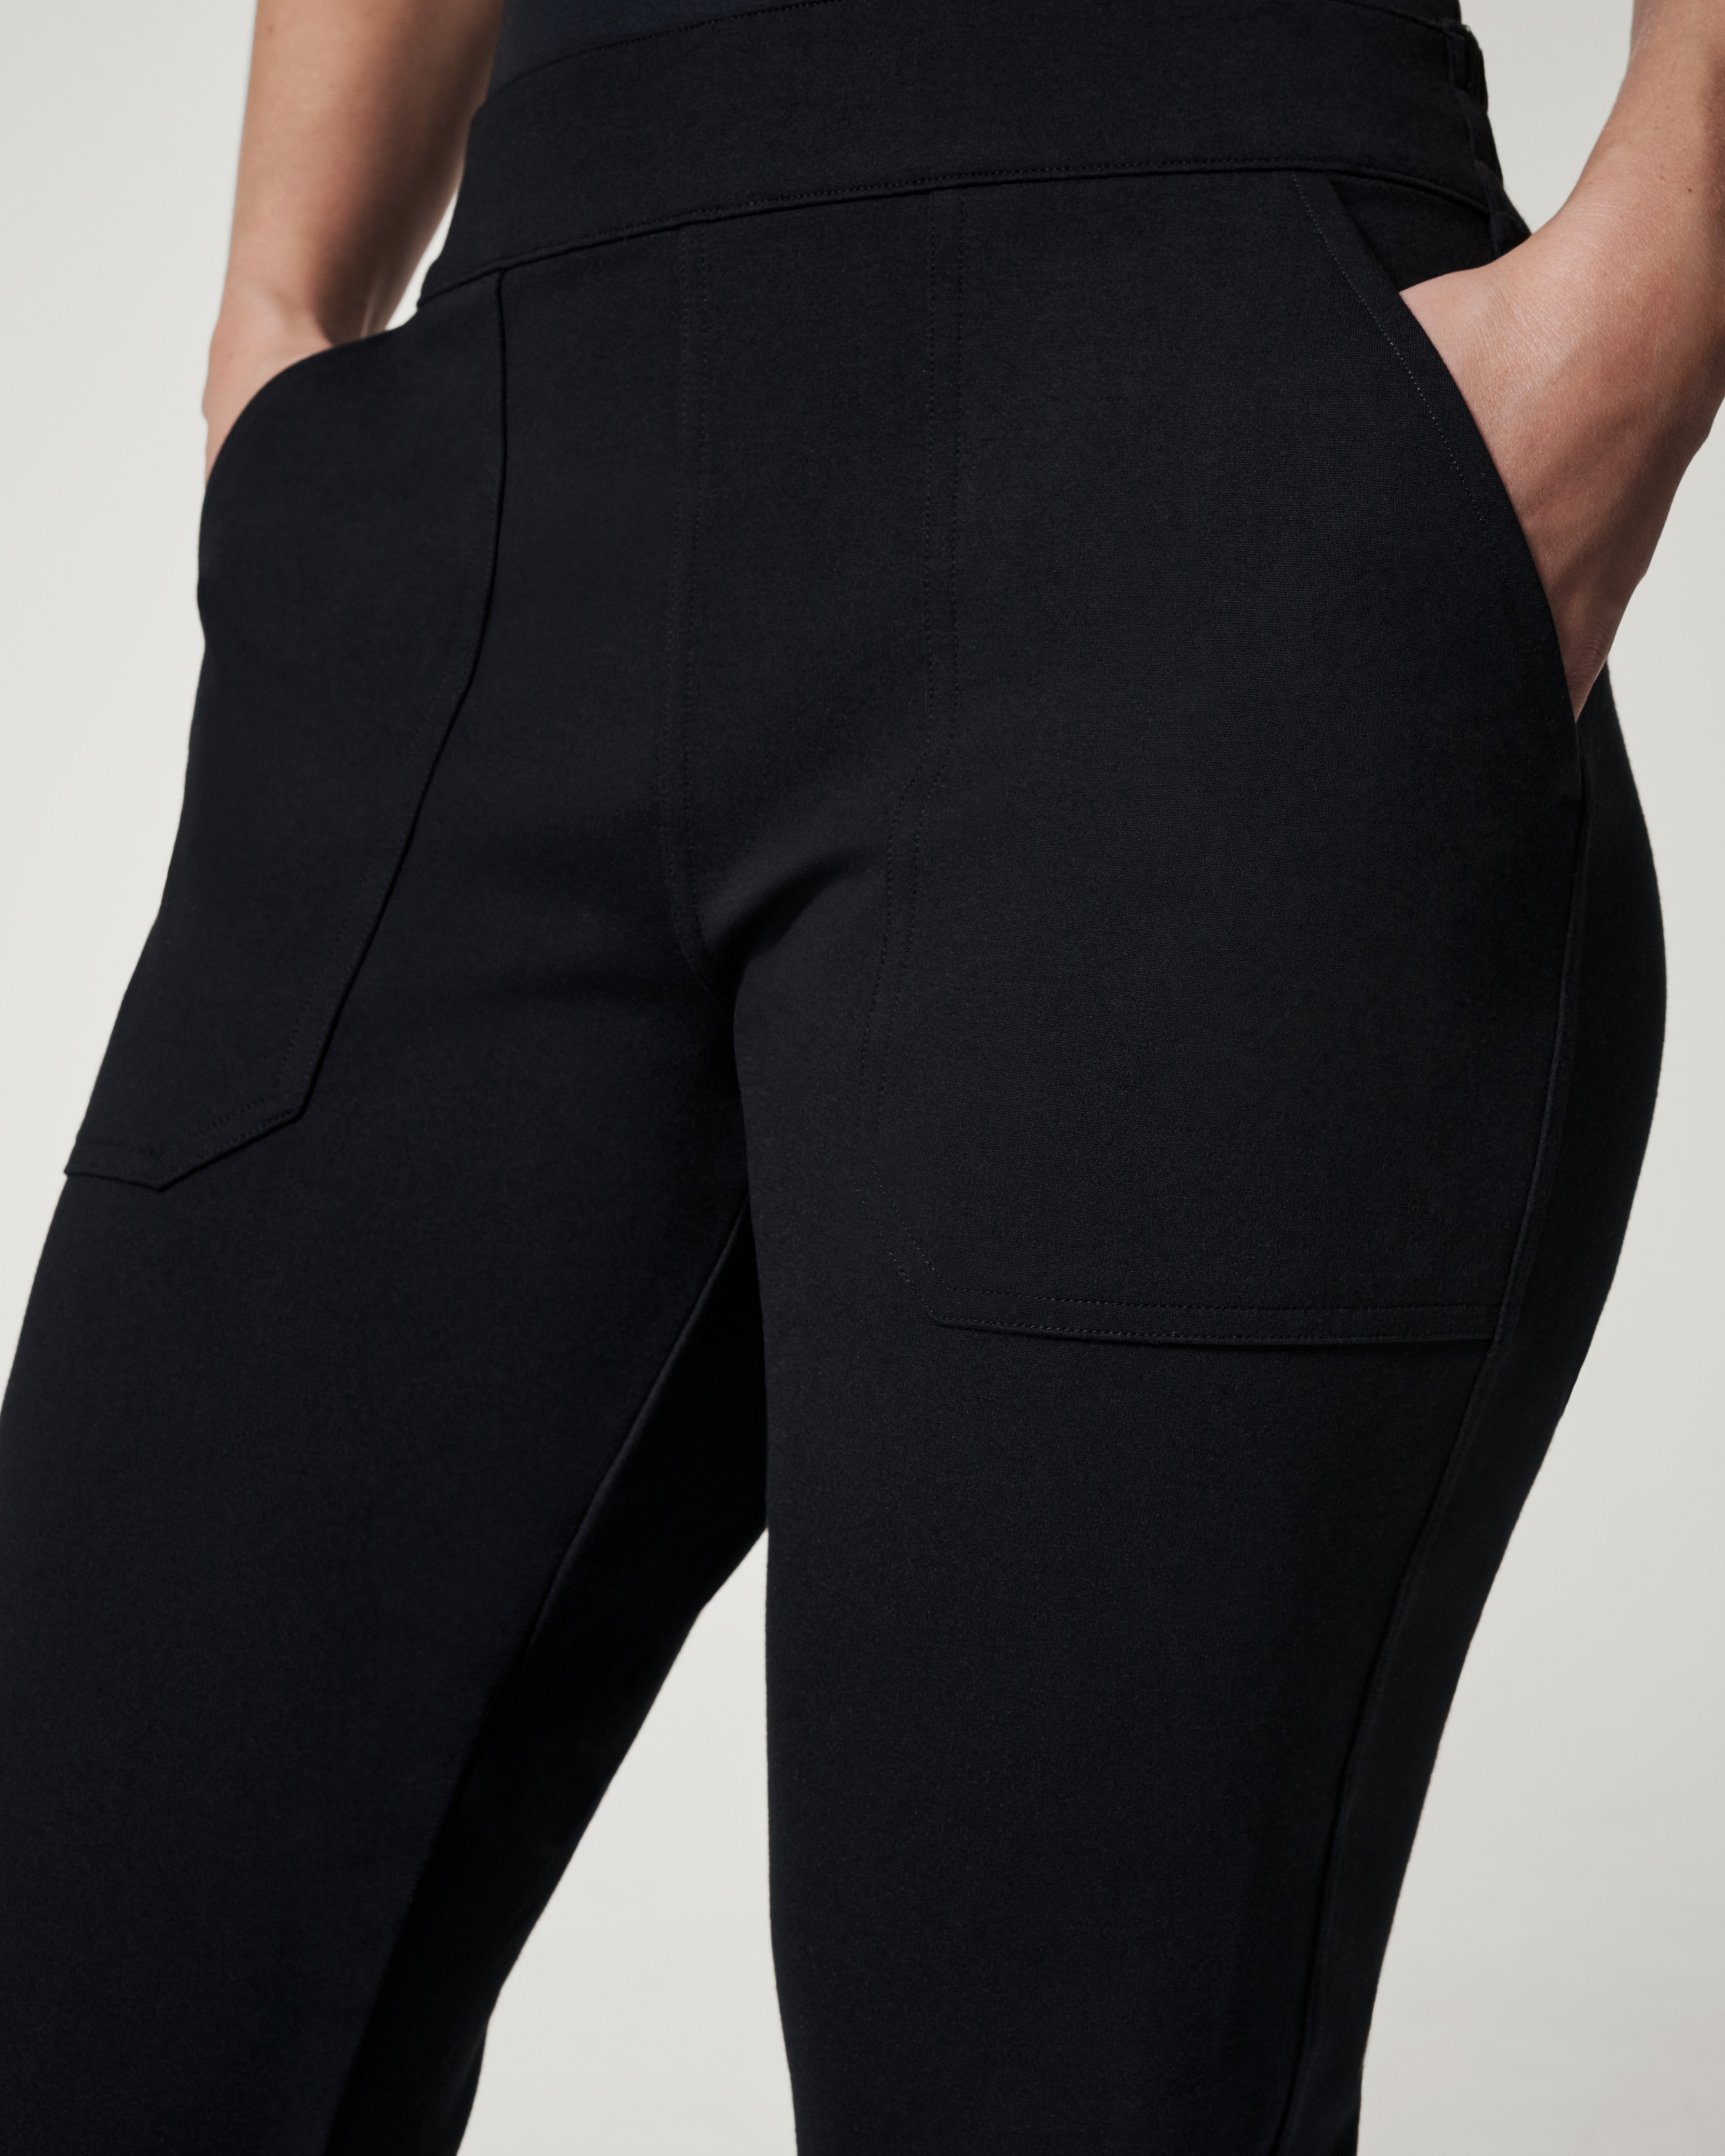 Spanx Perfect Pant Joggers, now 20% off for Black Friday